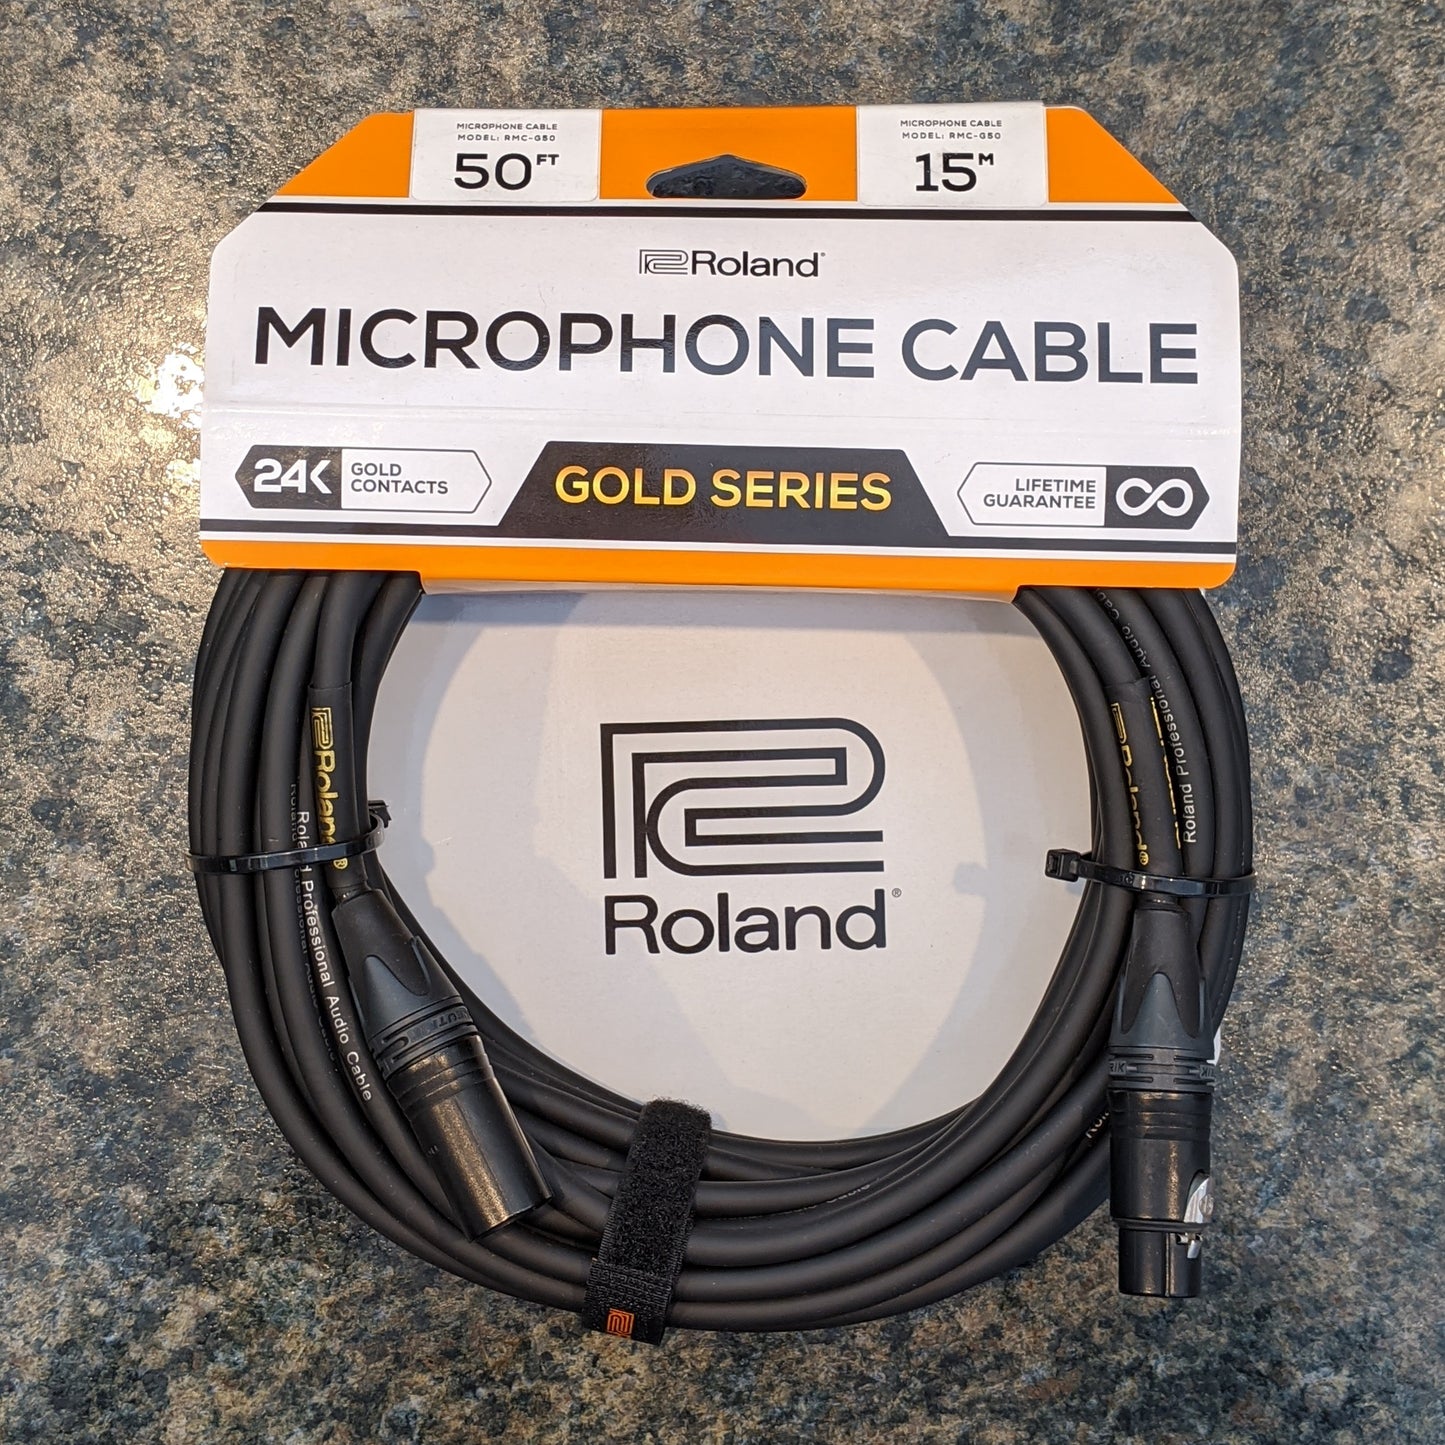 Roland/Boss - Gold Series - XLR Microphone Cables - Lifetime Guarantee - 24K Gold Contacts